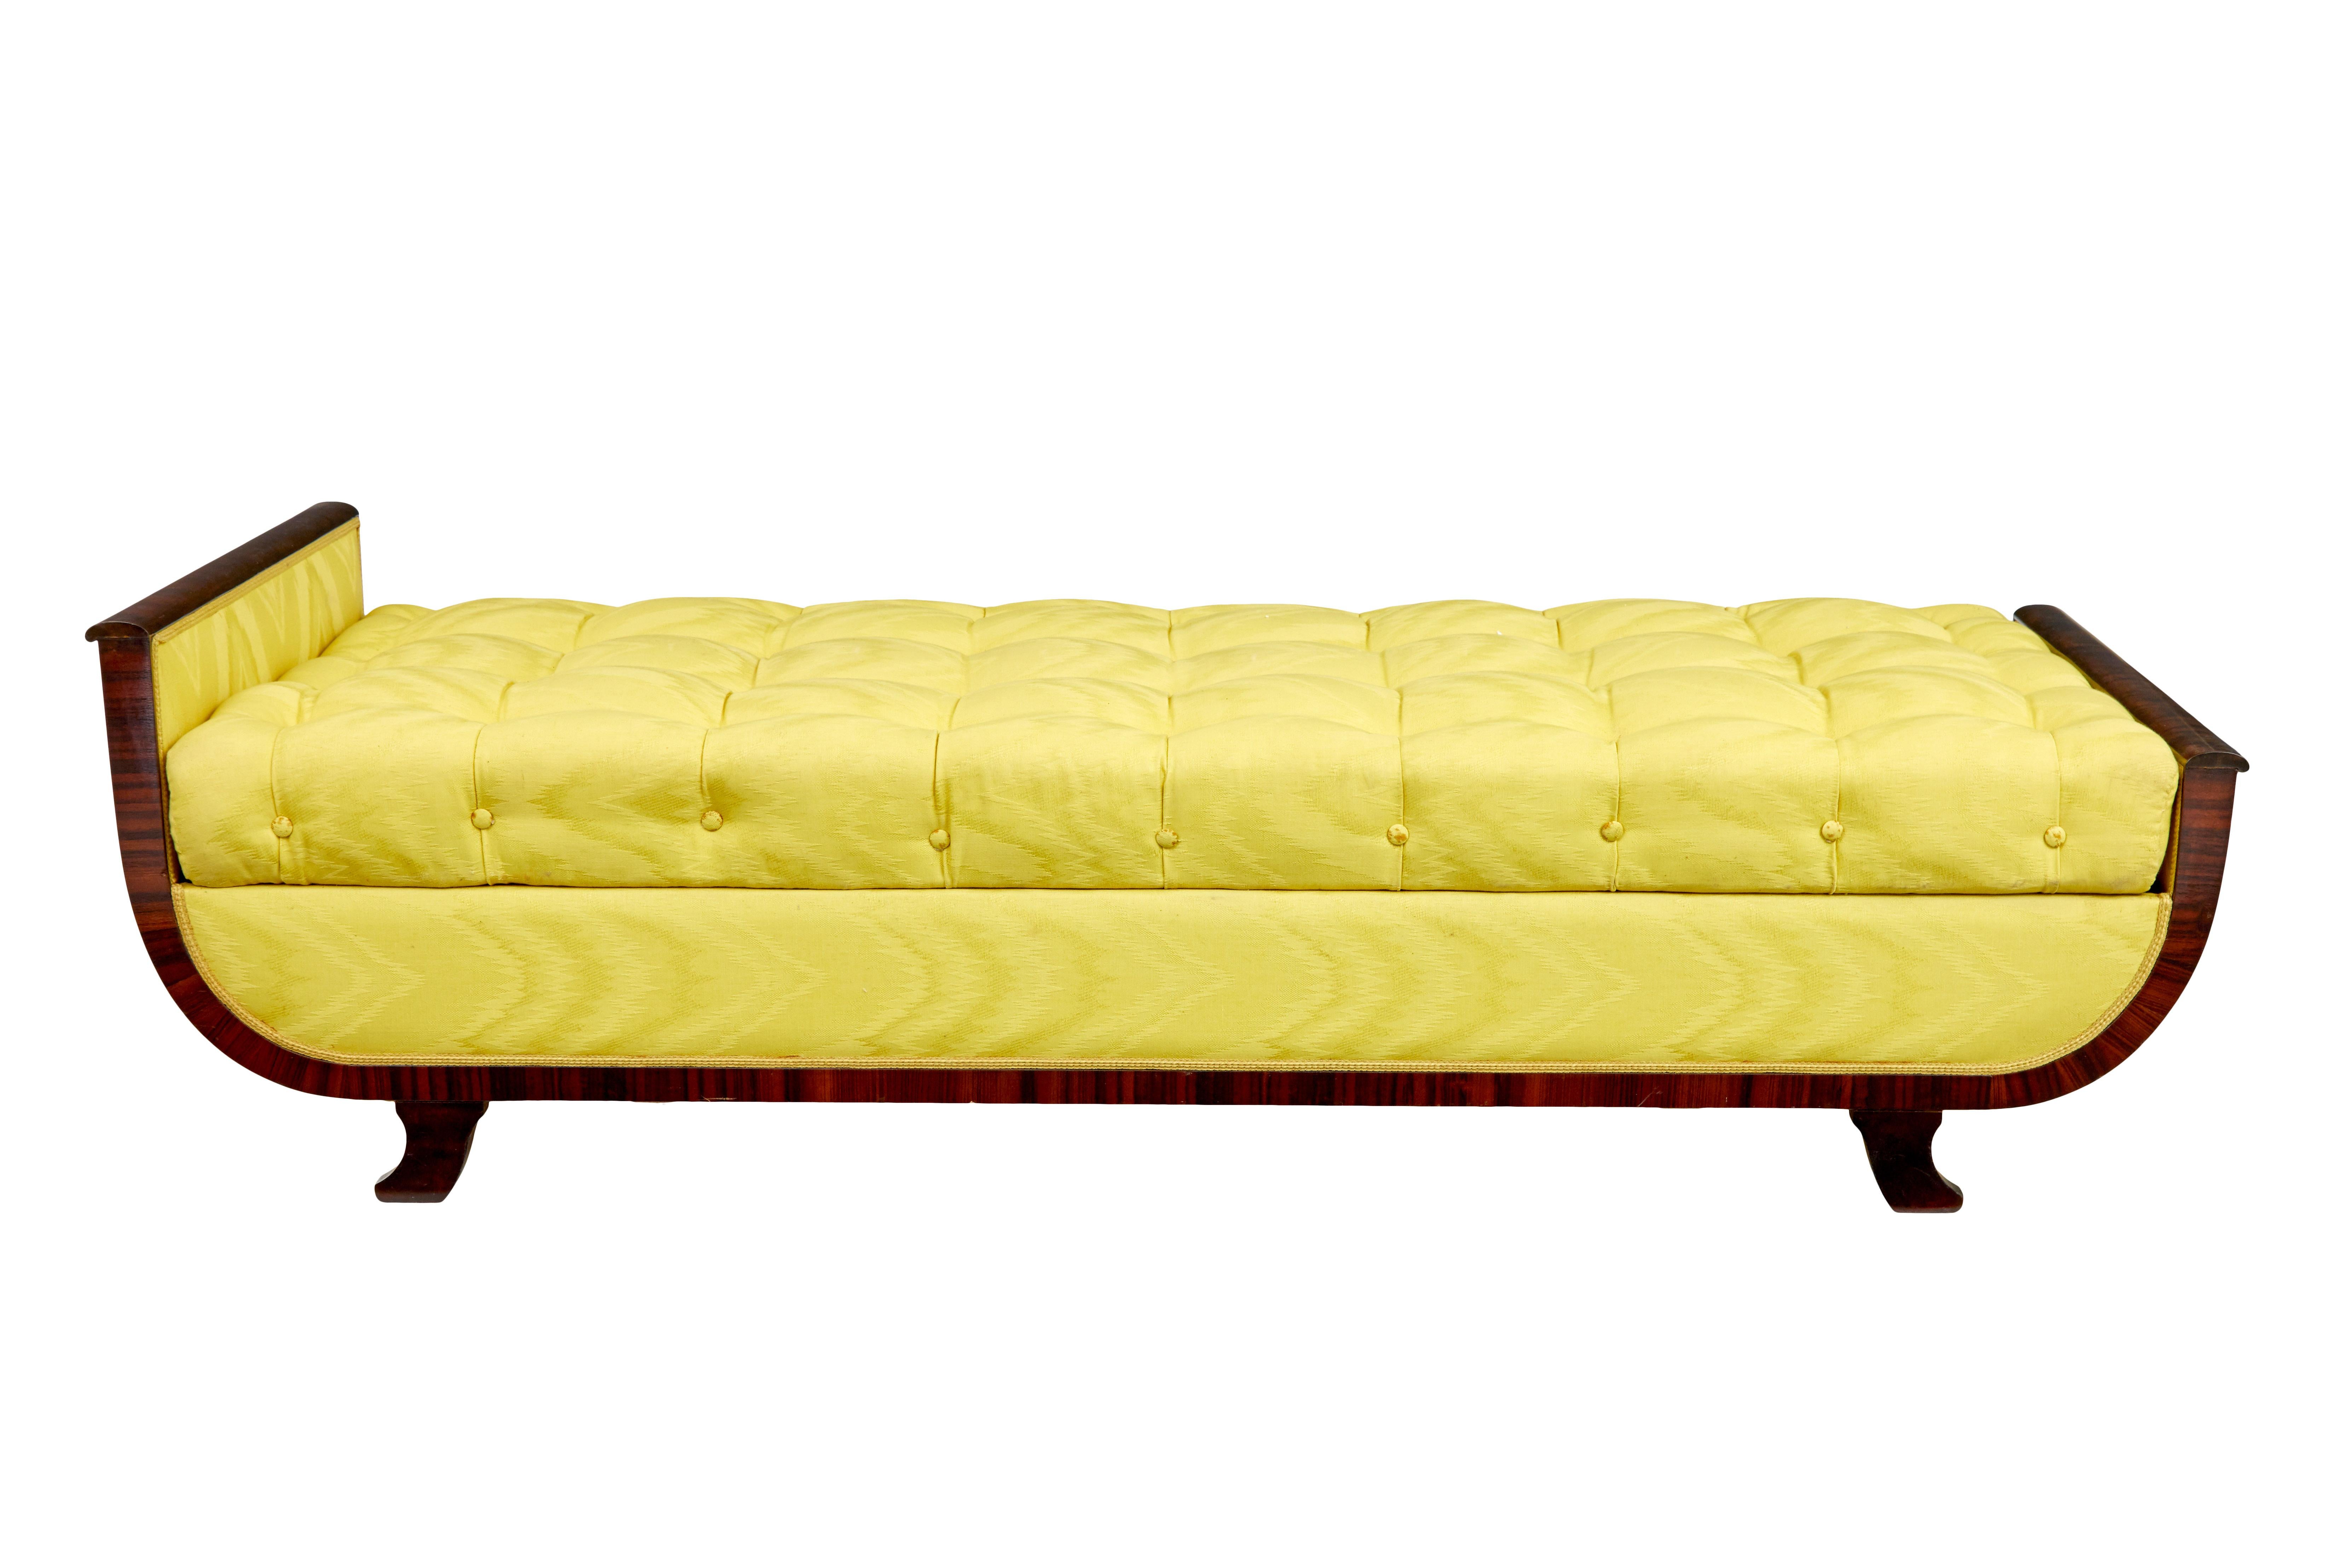 Scandinavian art deco birch and kingwood daybed circa 1930.

Fine quality and elegantly designed Swedish daybed.  Birch head and foot rail, with kingwood veneered sides.  Removable button back cushion.

Veneered both sides making this piece